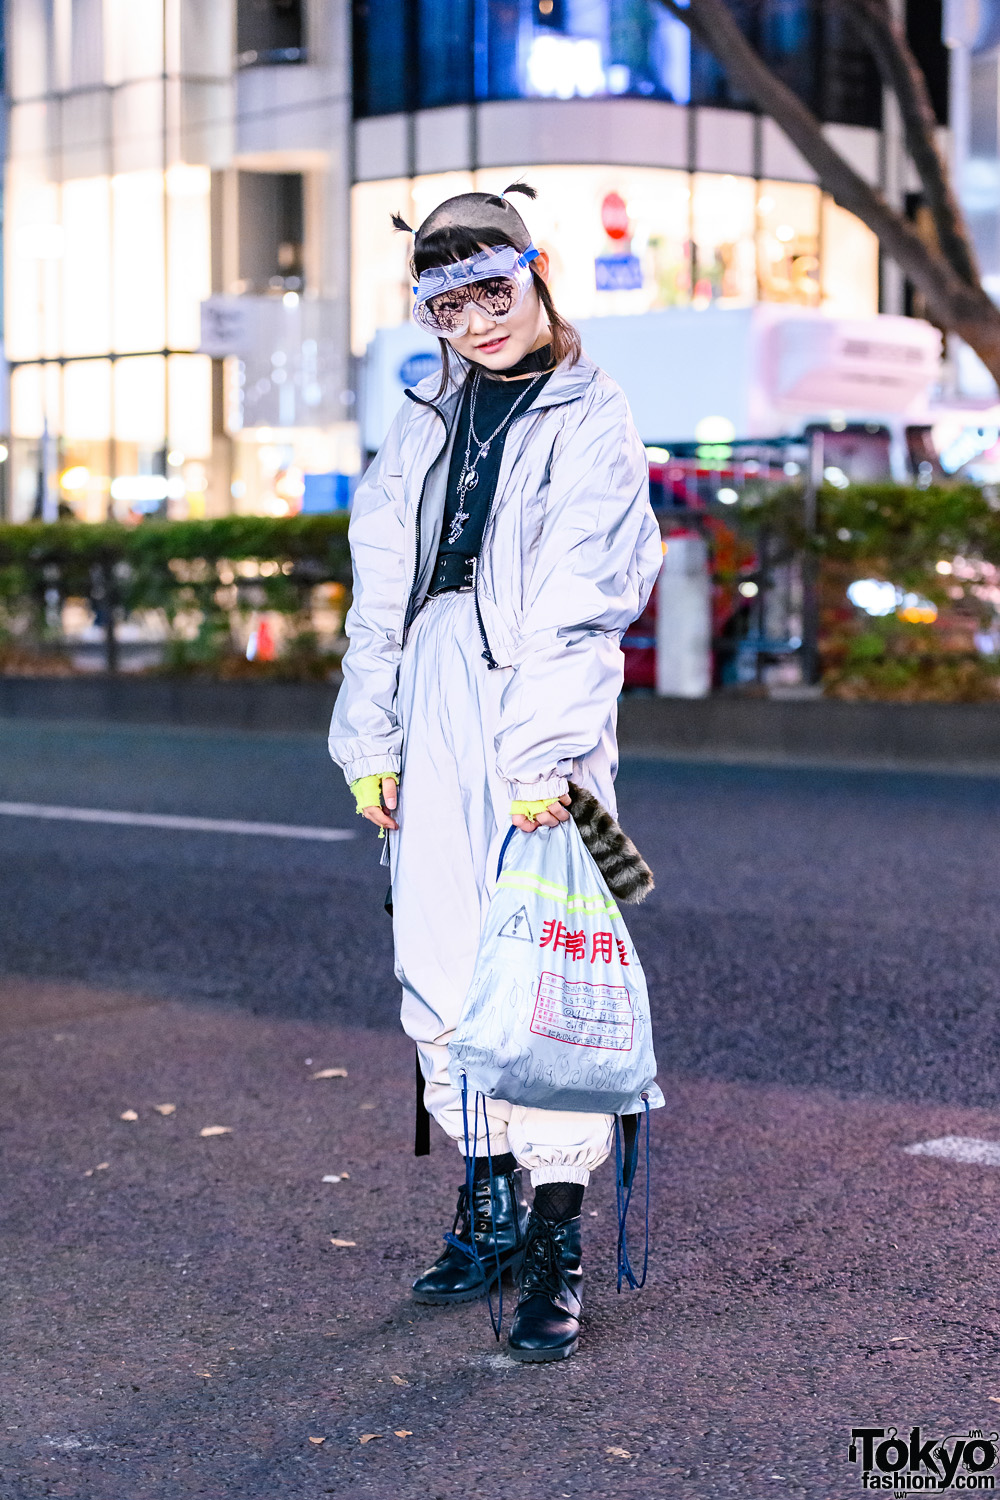 Tokyo Streetwear Styles w/ Partially-Shaved Hair, Gas Mask, Clear ...